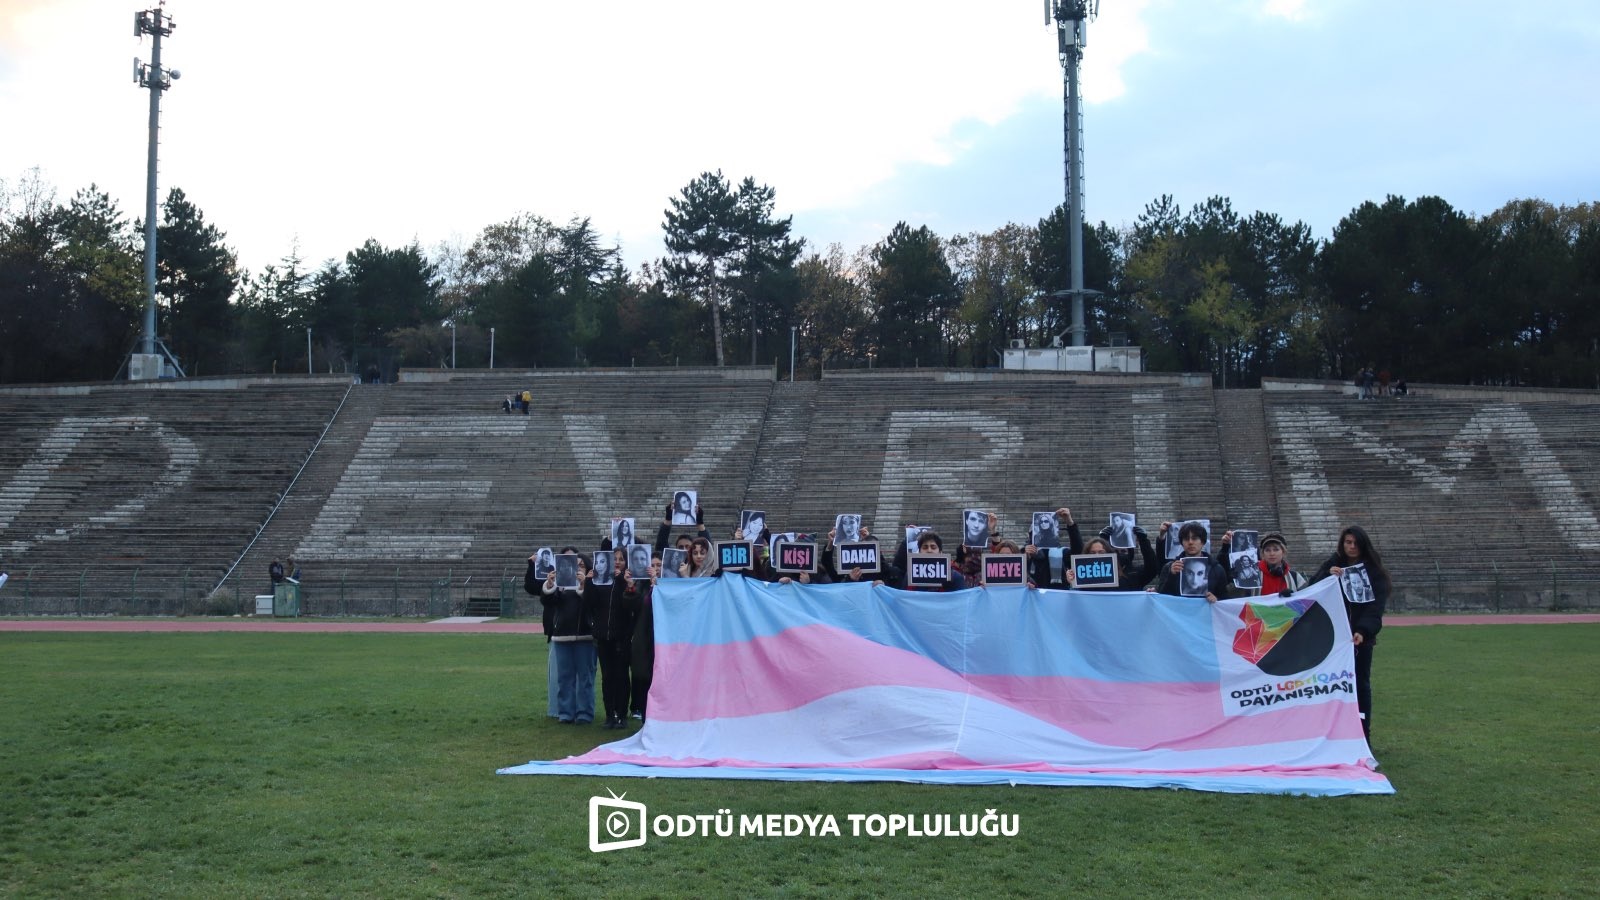 “We are here to pay AKP-MHP government back for all our trans friends slaughtered by them” | Kaos GL - News Portal for LGBTI+ News